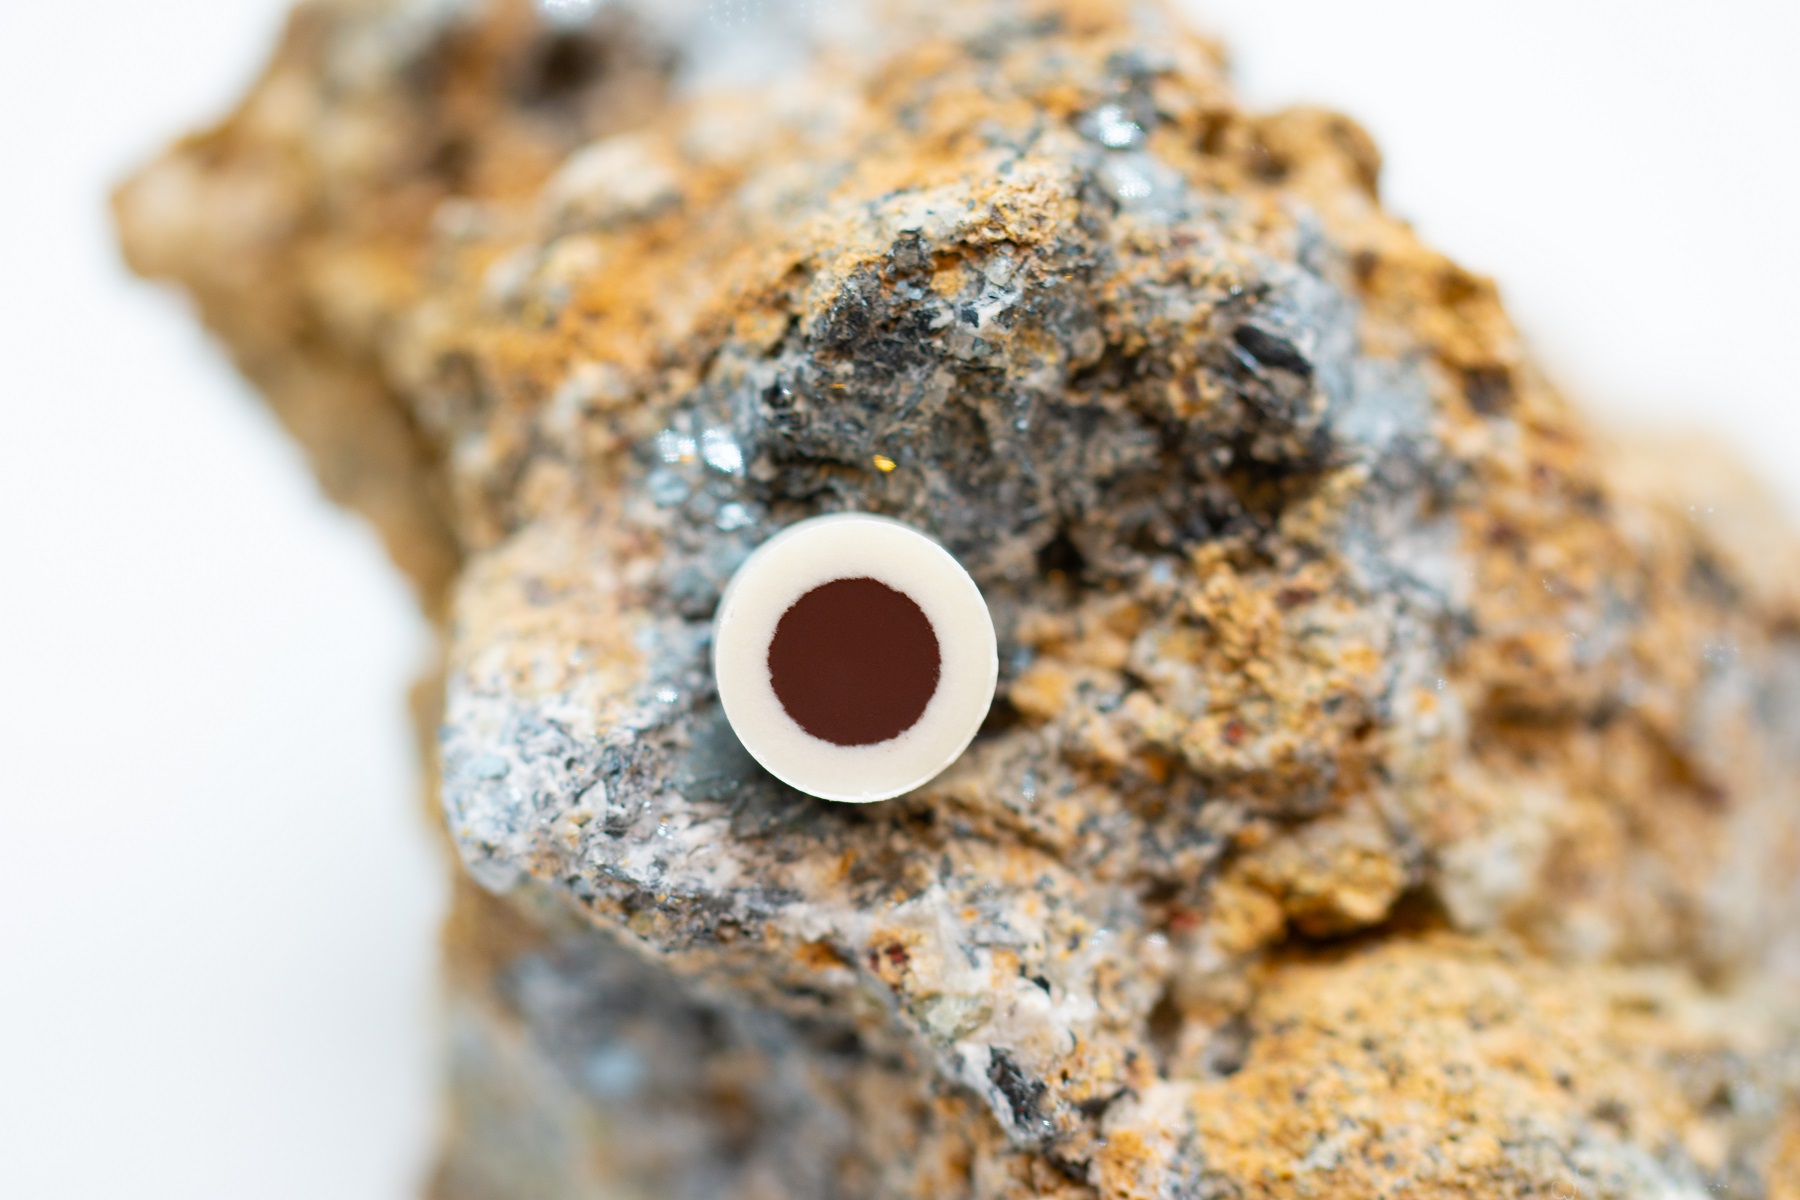 Hematite certified reference material: HMIE-Nano-Pellet